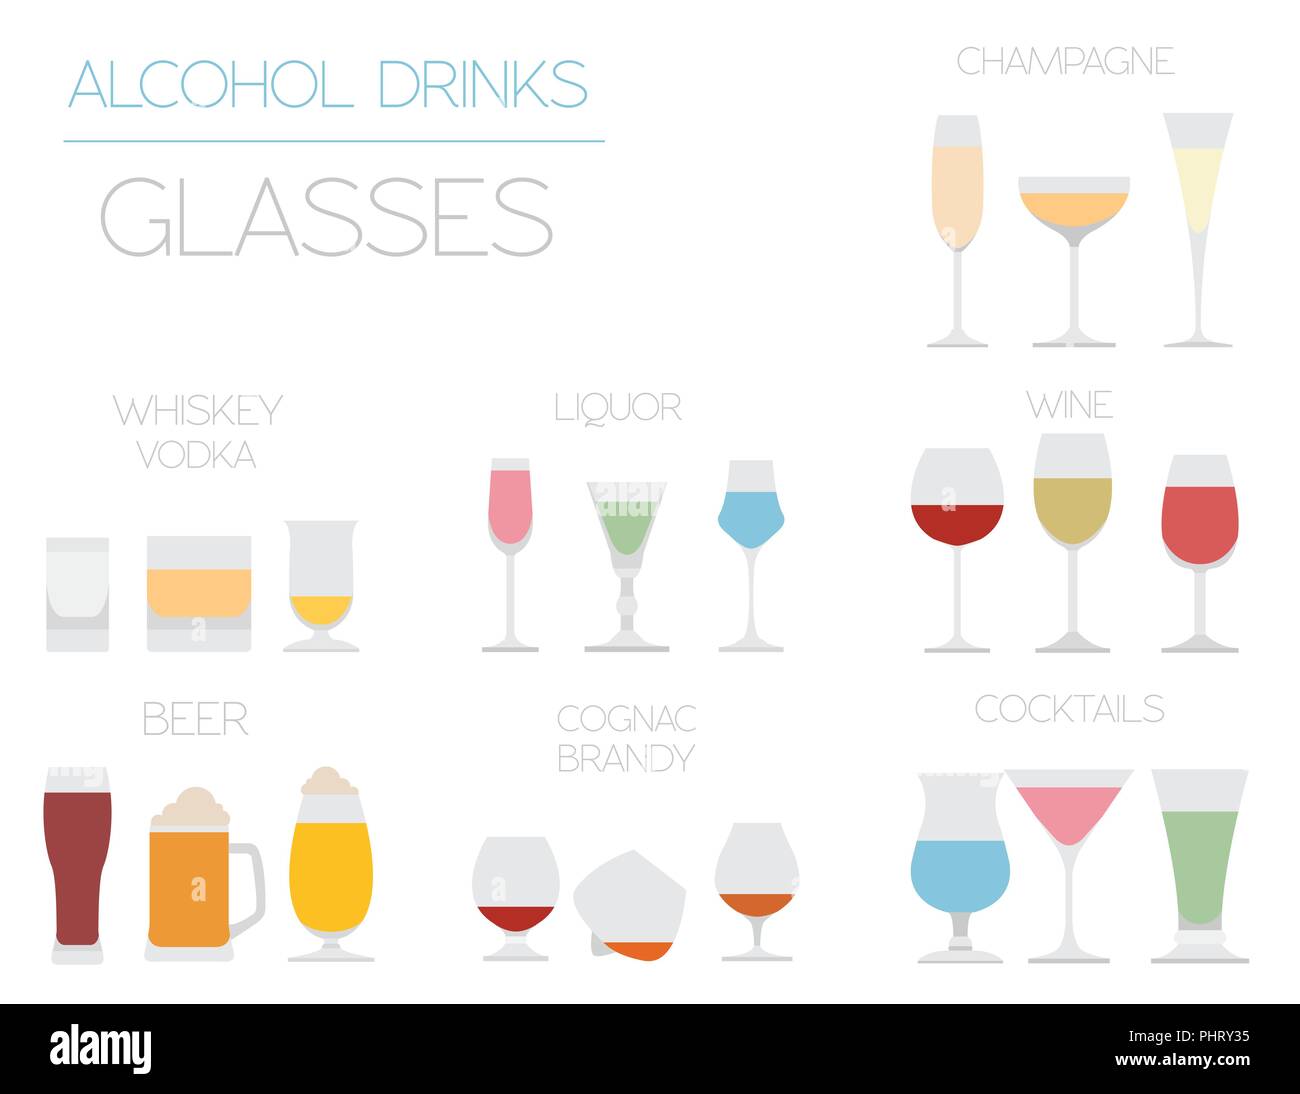 https://c8.alamy.com/comp/PHRY35/alcohol-glasses-flat-icon-set-different-alcohol-beverages-vector-illustration-PHRY35.jpg